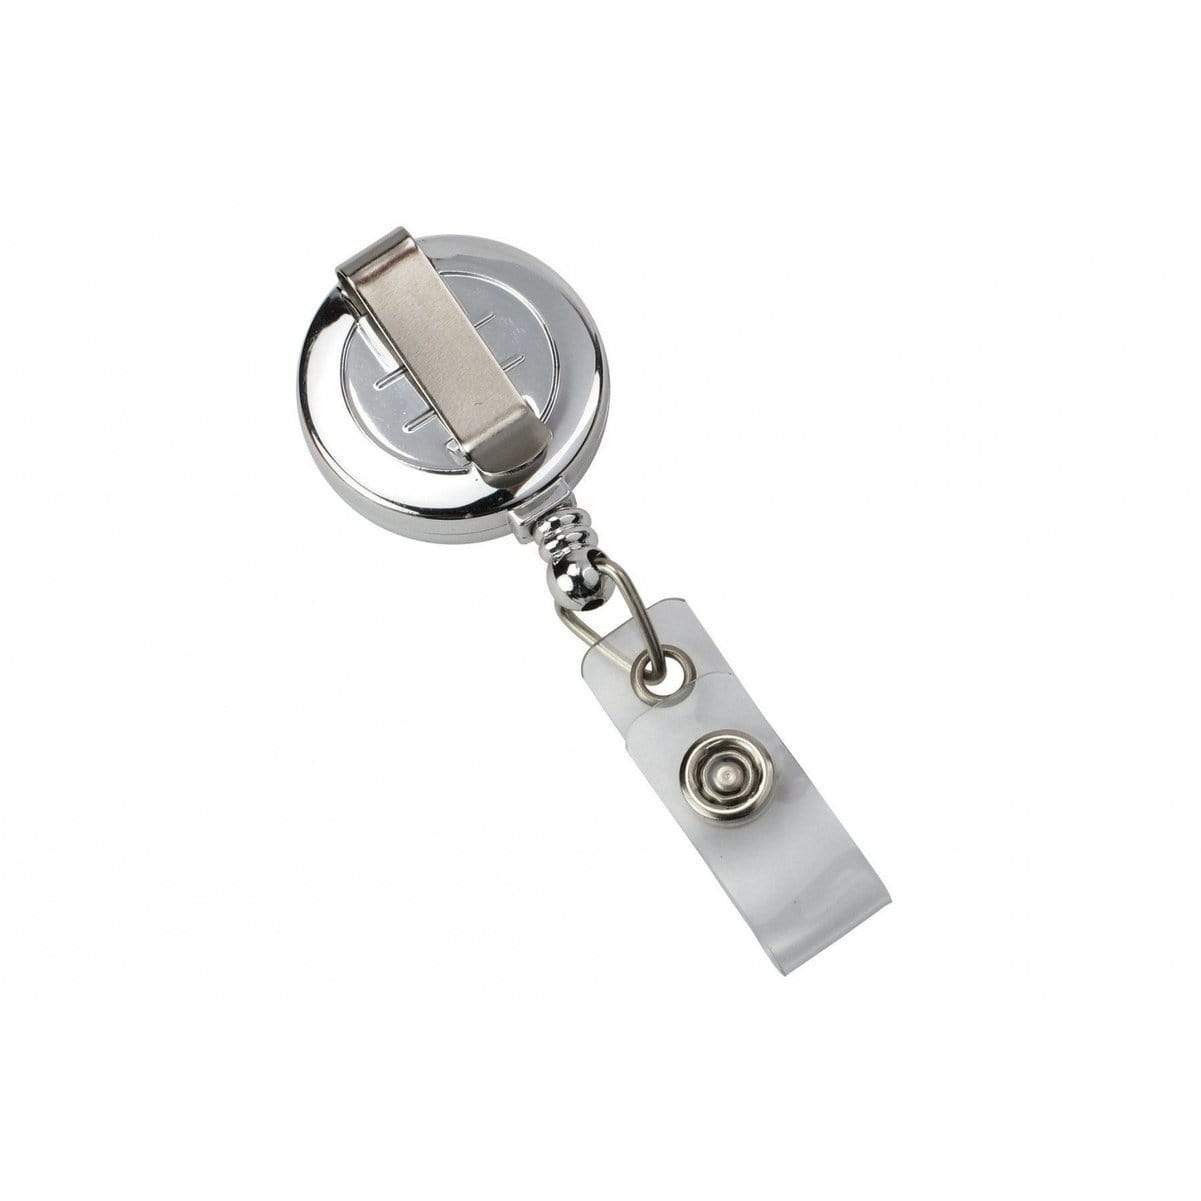 Silver Chrome Plastic Badge Reel With  Belt Clip (P/N 2120-3030) 2120-3030